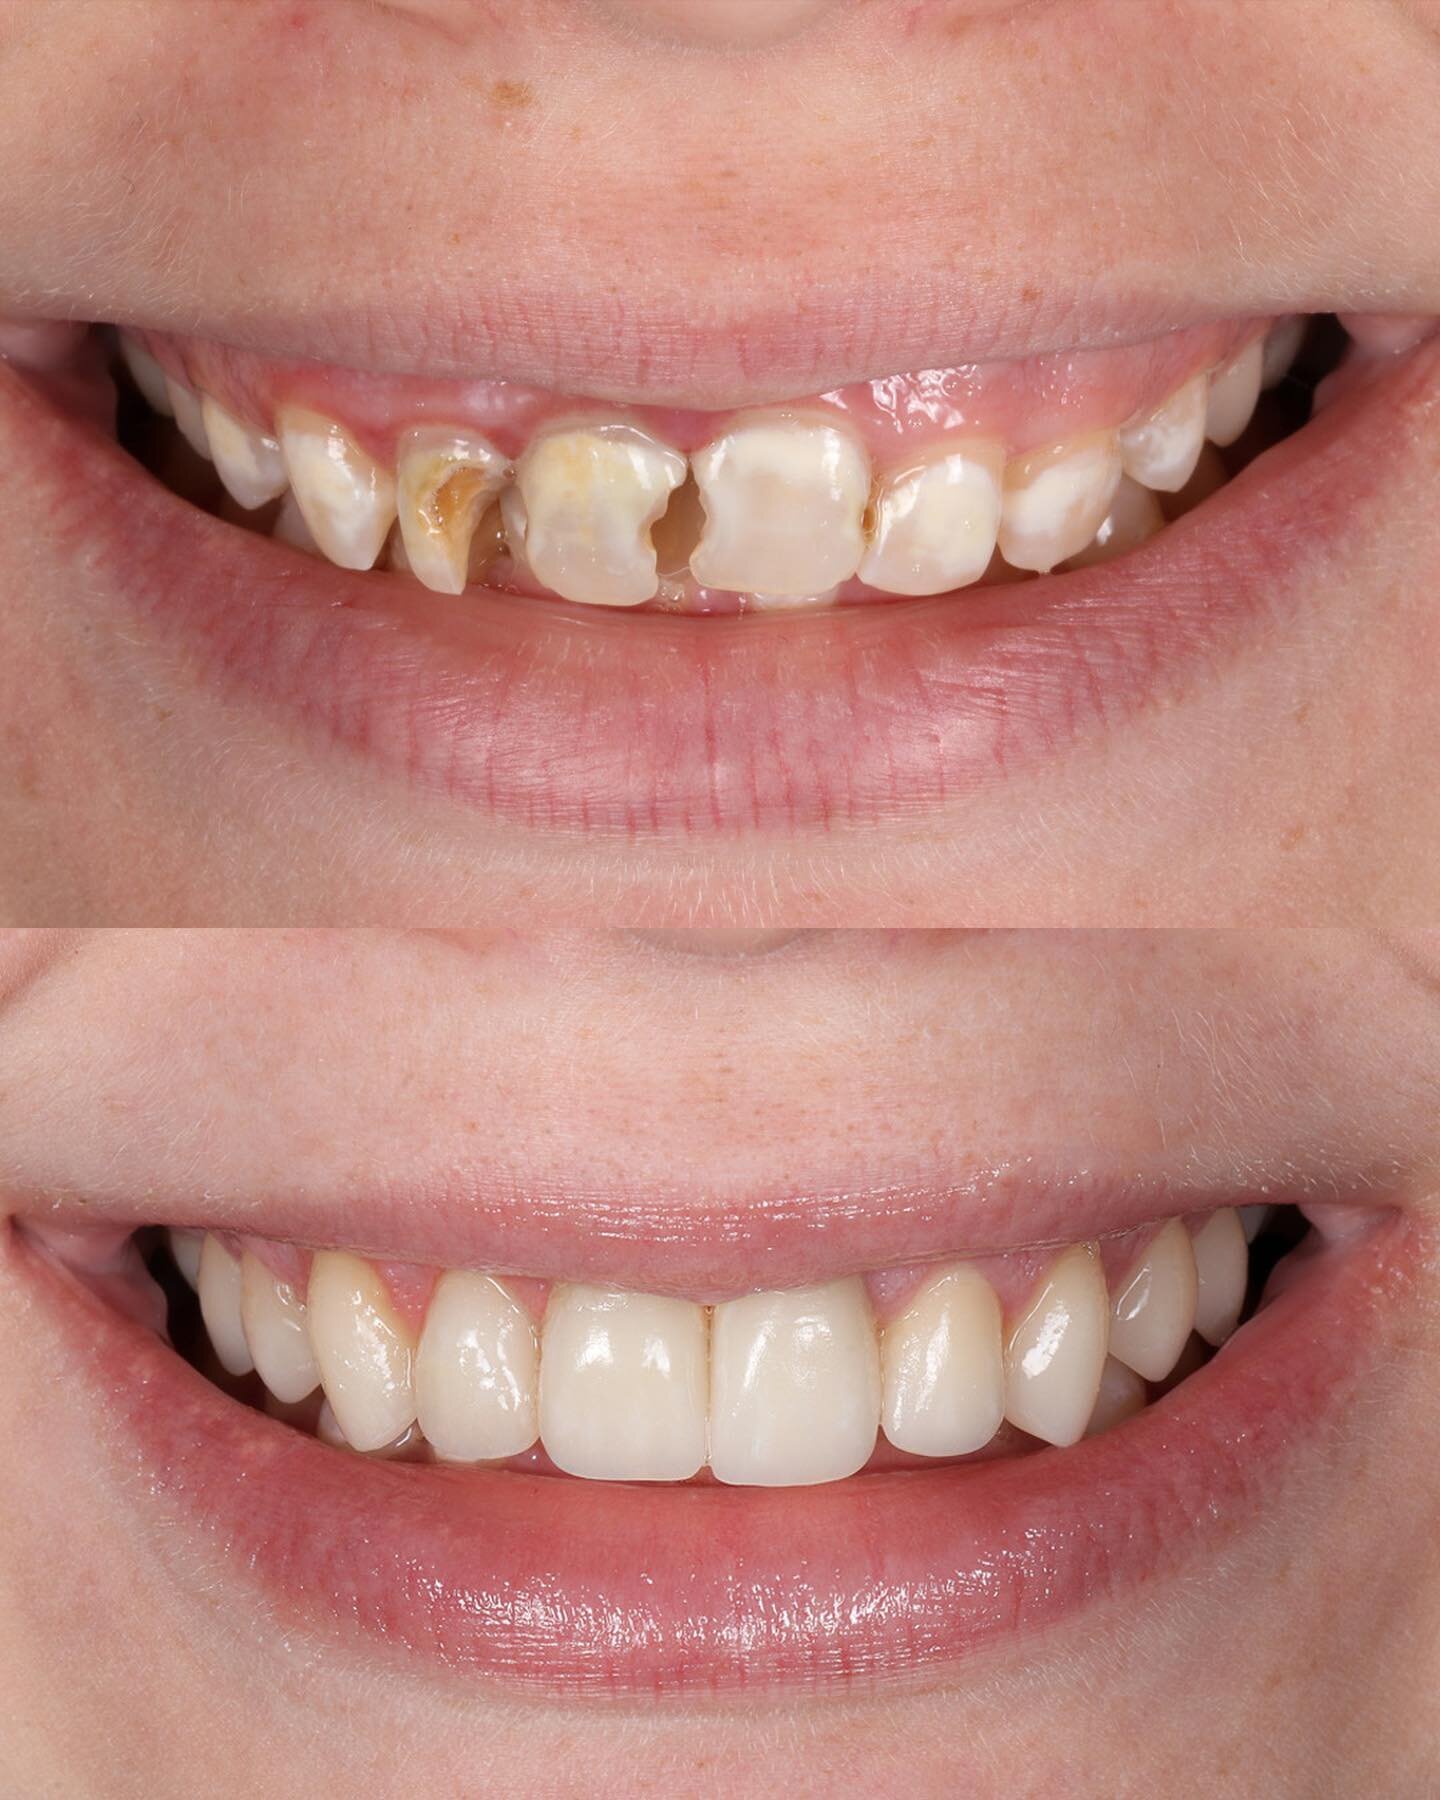 Mix of crowns, veneers, and crown lengthening to give this patient a beautiful smile that she loved 

RCTs were completed on the teeth that were non-vital. Crown lengthening from 4-13 to remove excess gingiva, and lengthen her teeth. Finally, self mi